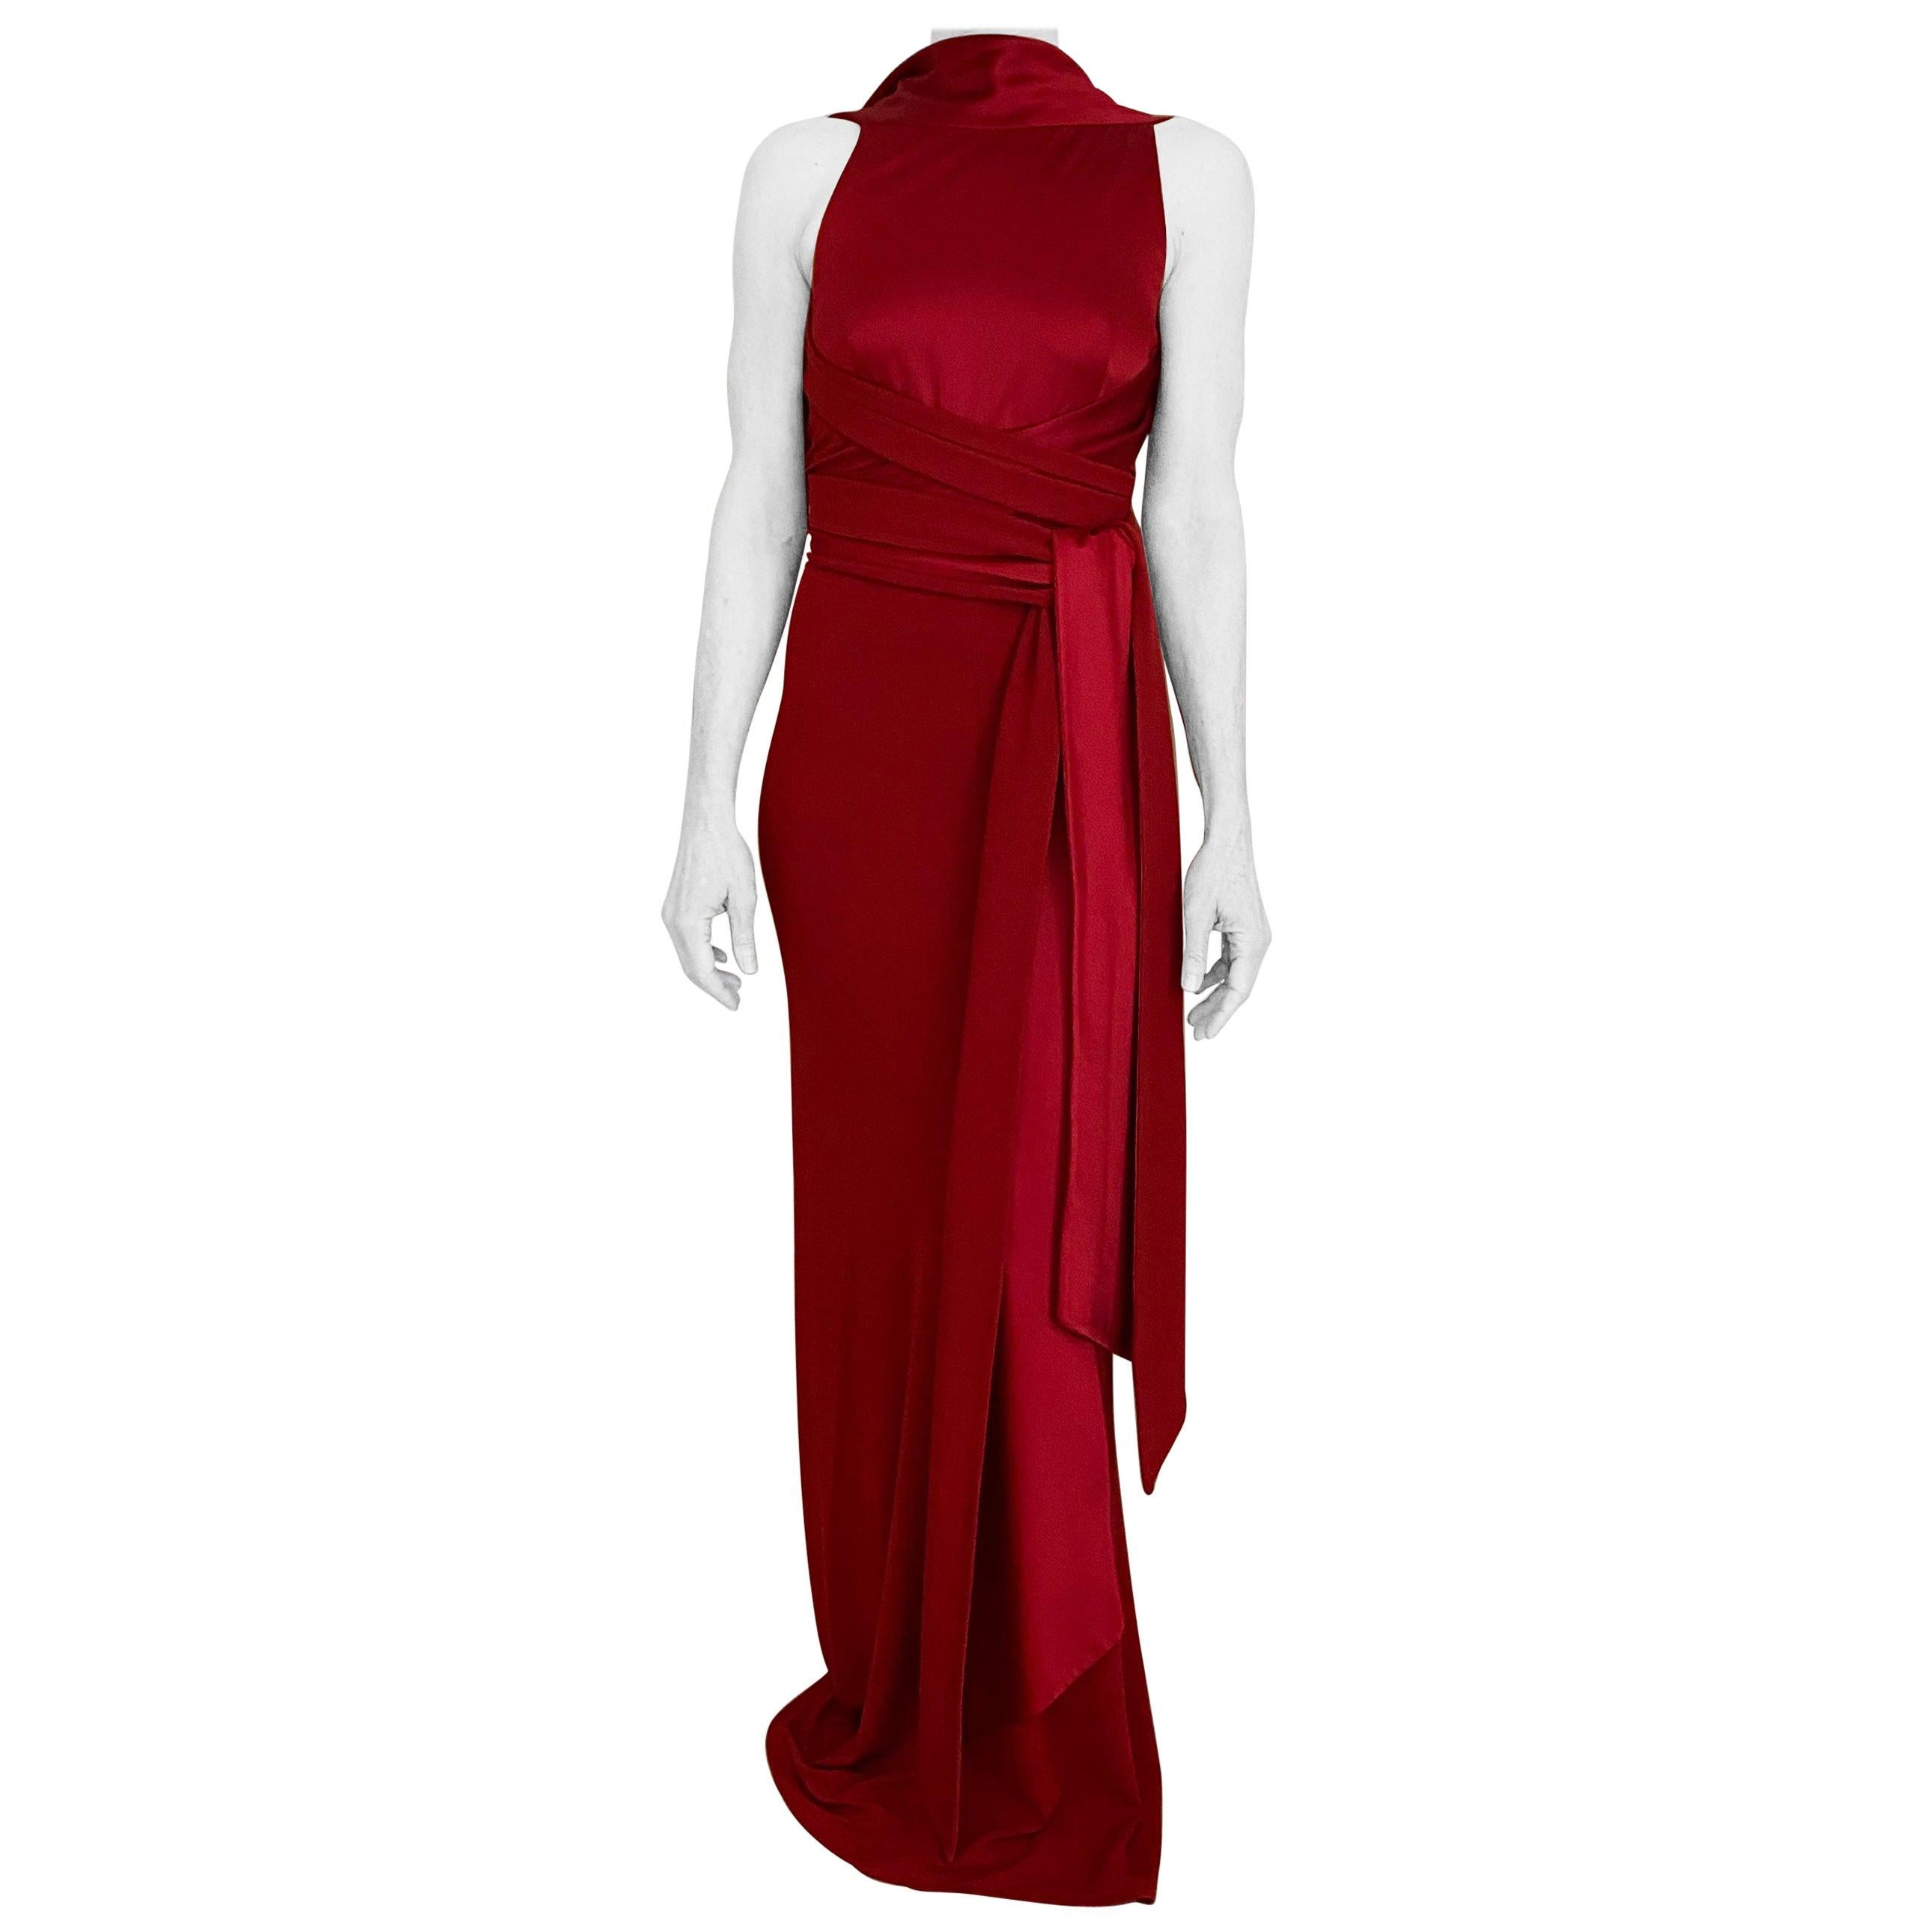 Gianfranco Ferre Red Jersey Satin Gown